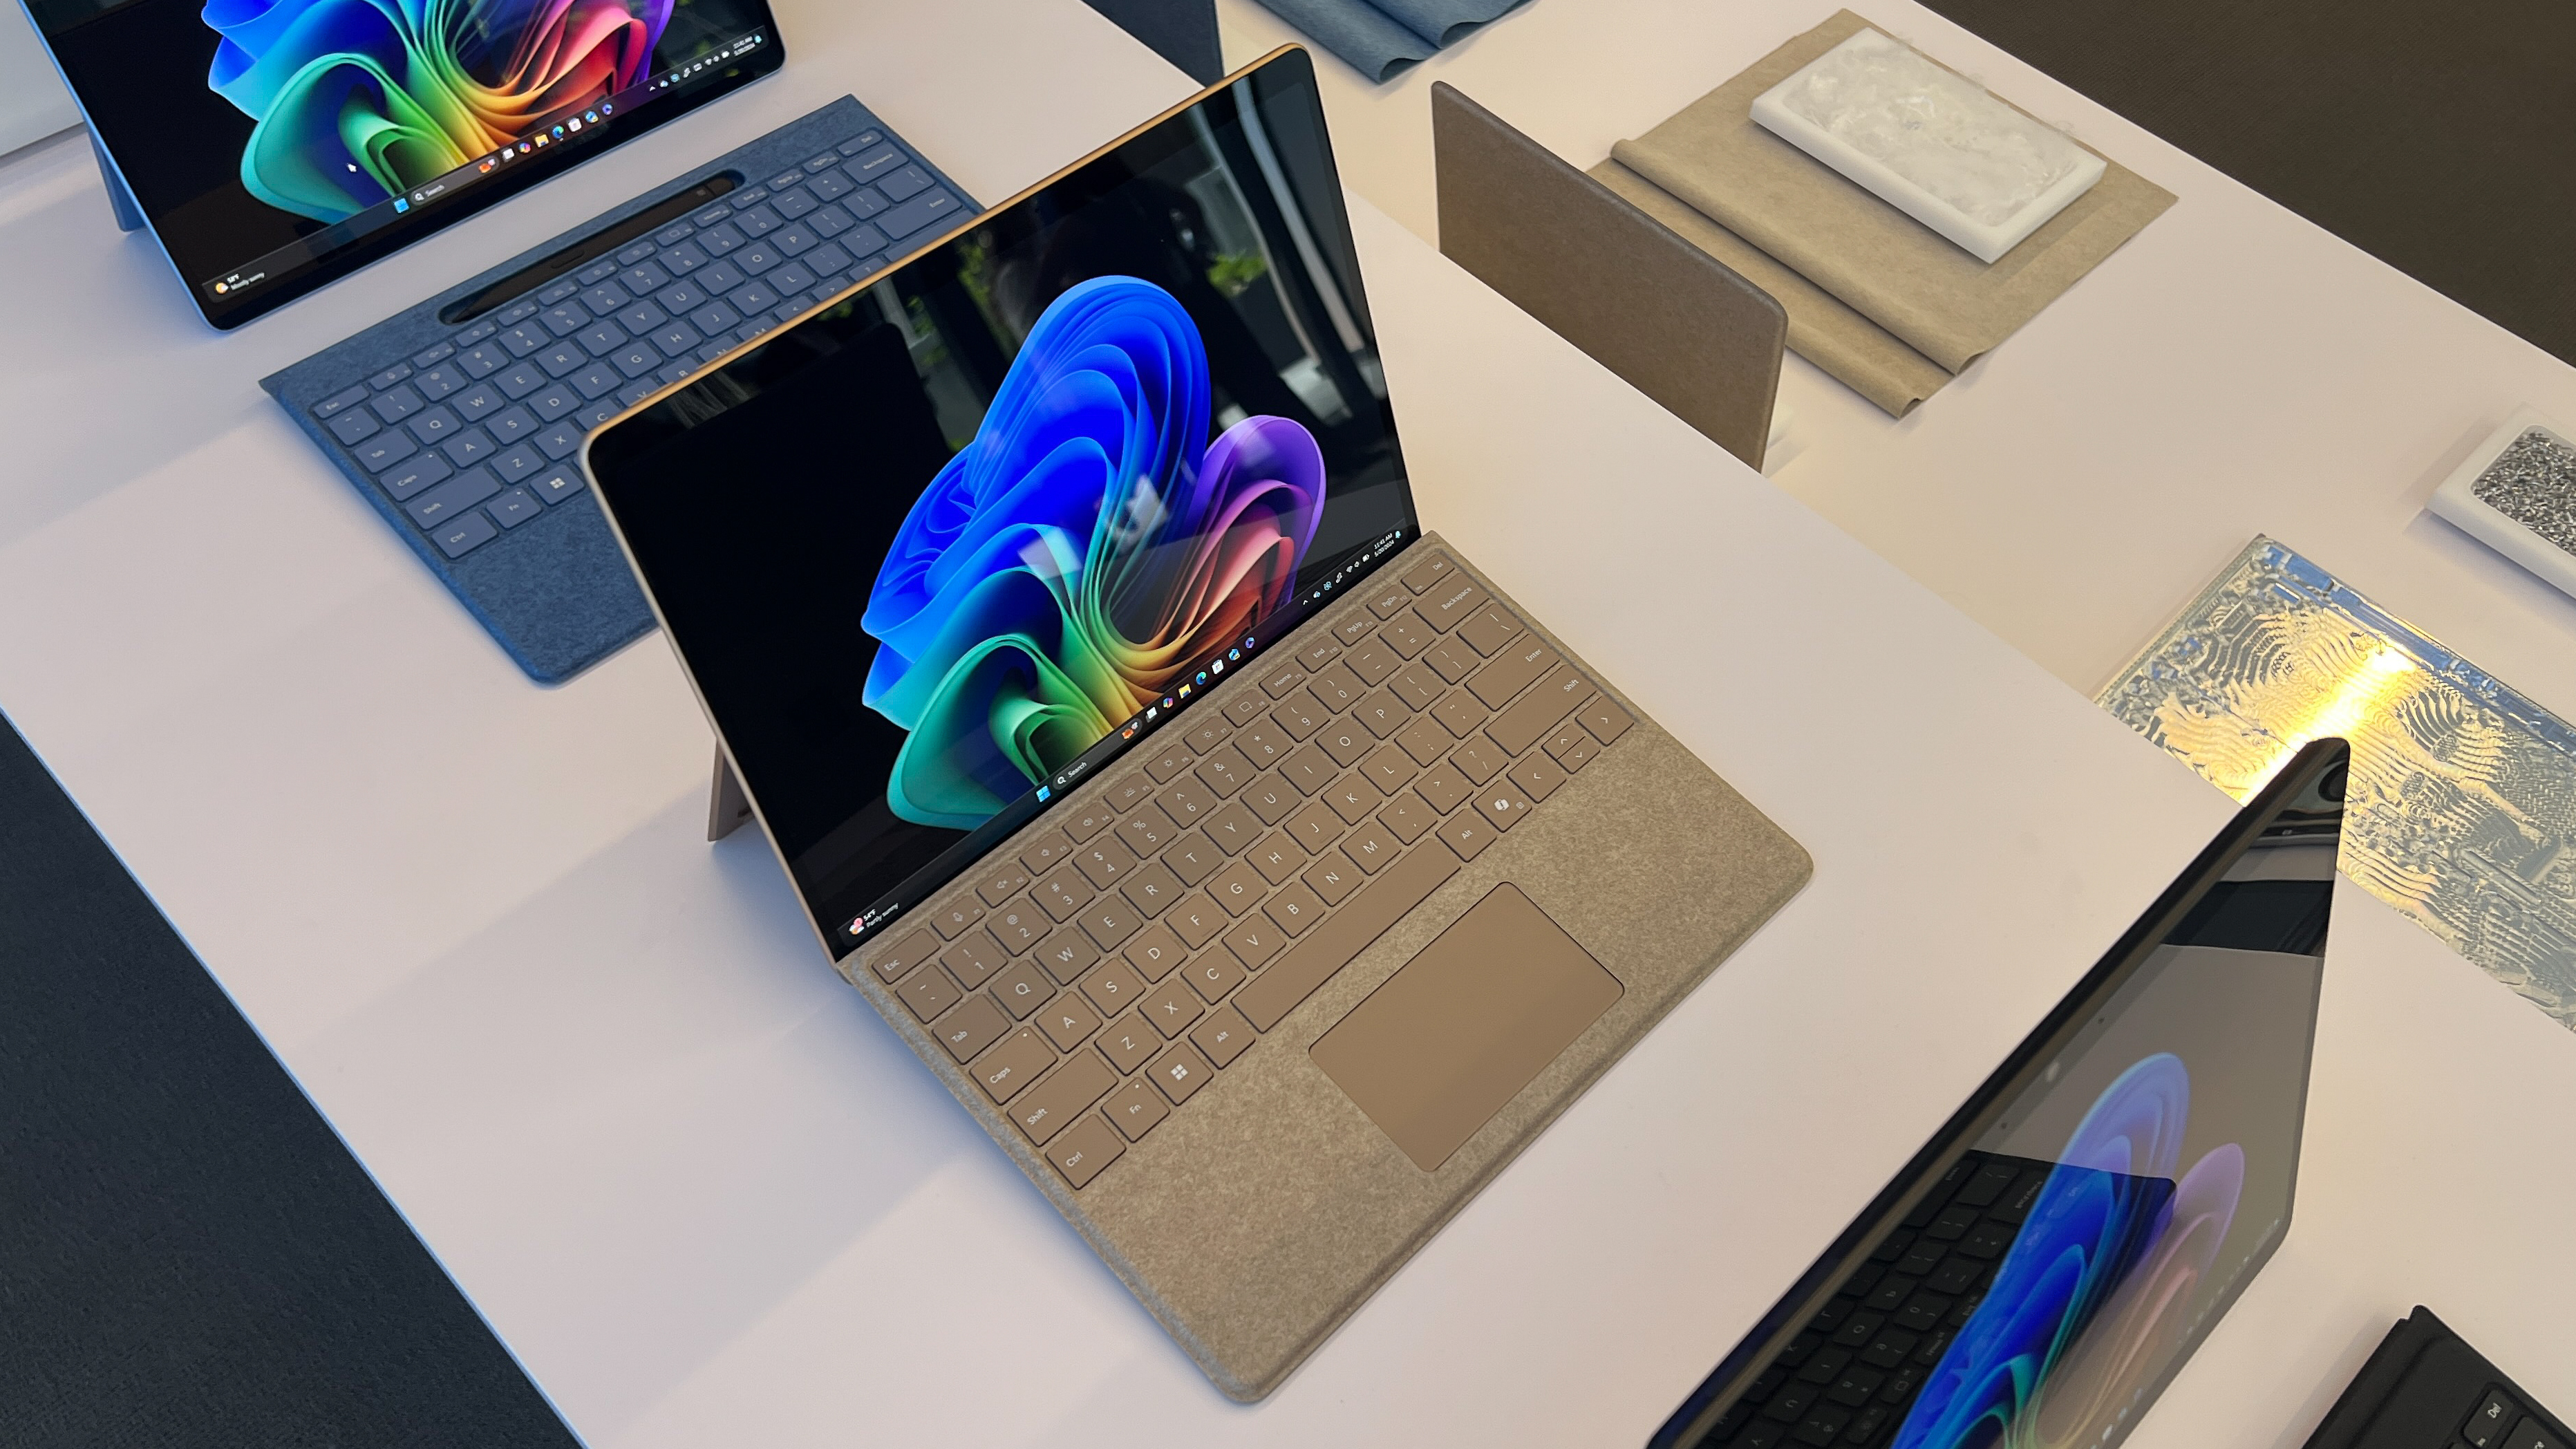 The Microsoft Surface Pro in Dune colorway